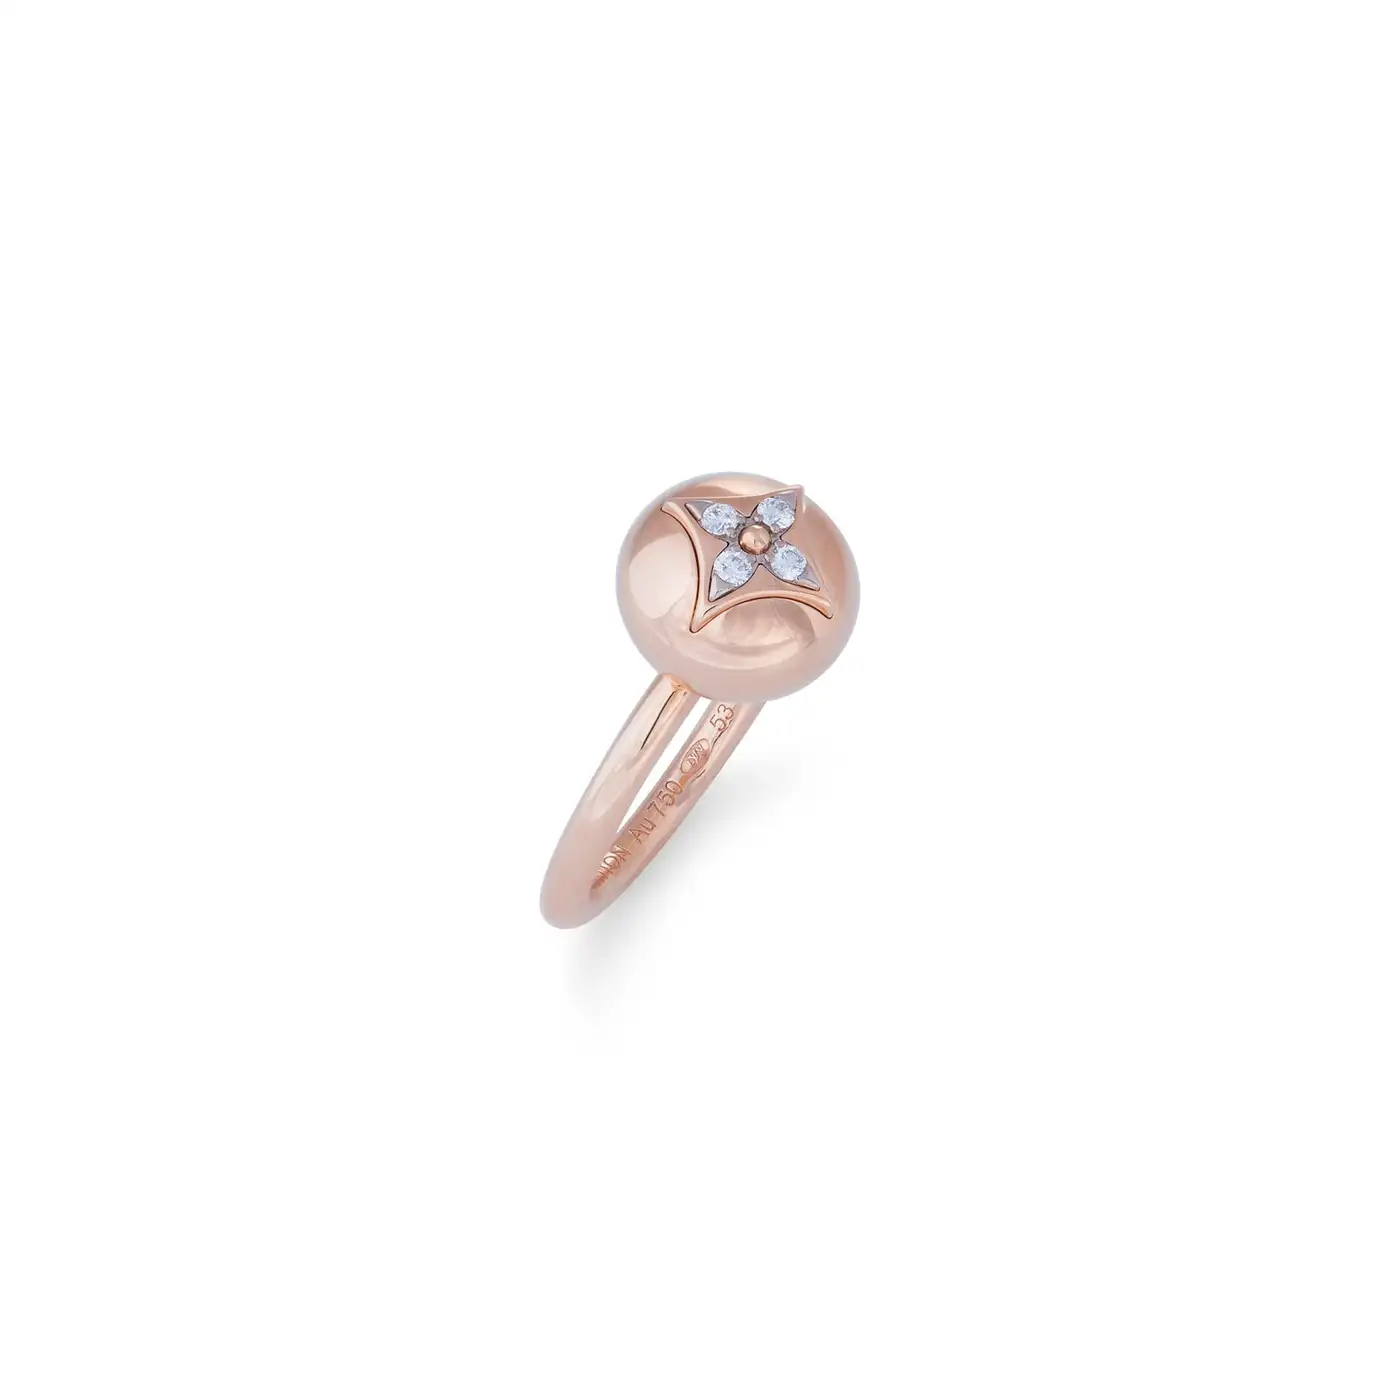 Louis-Vuitton-B-Blossom-Gold-and-Diamond-Ring-4.webp